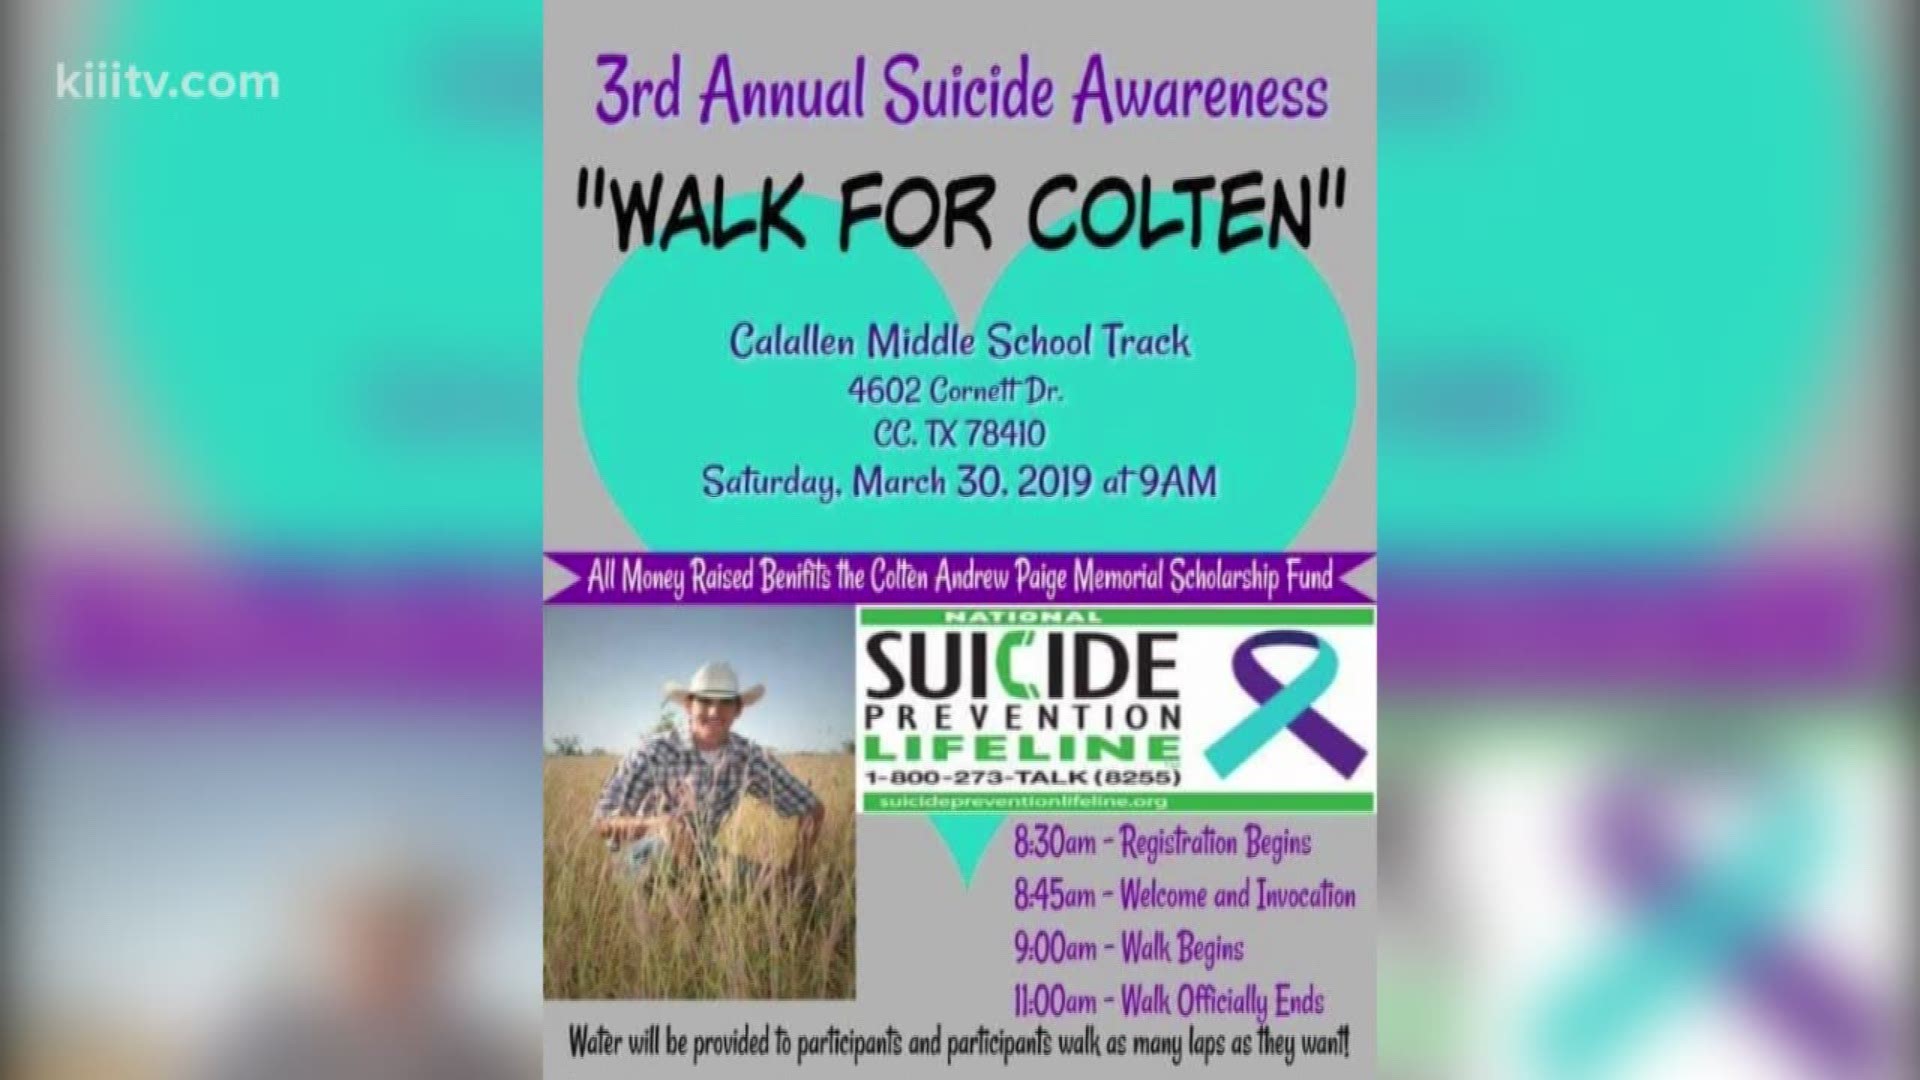 A suicide awareness walk on Saturday at Calallen Middle School will honor a 19-year-old young man who took his own life.